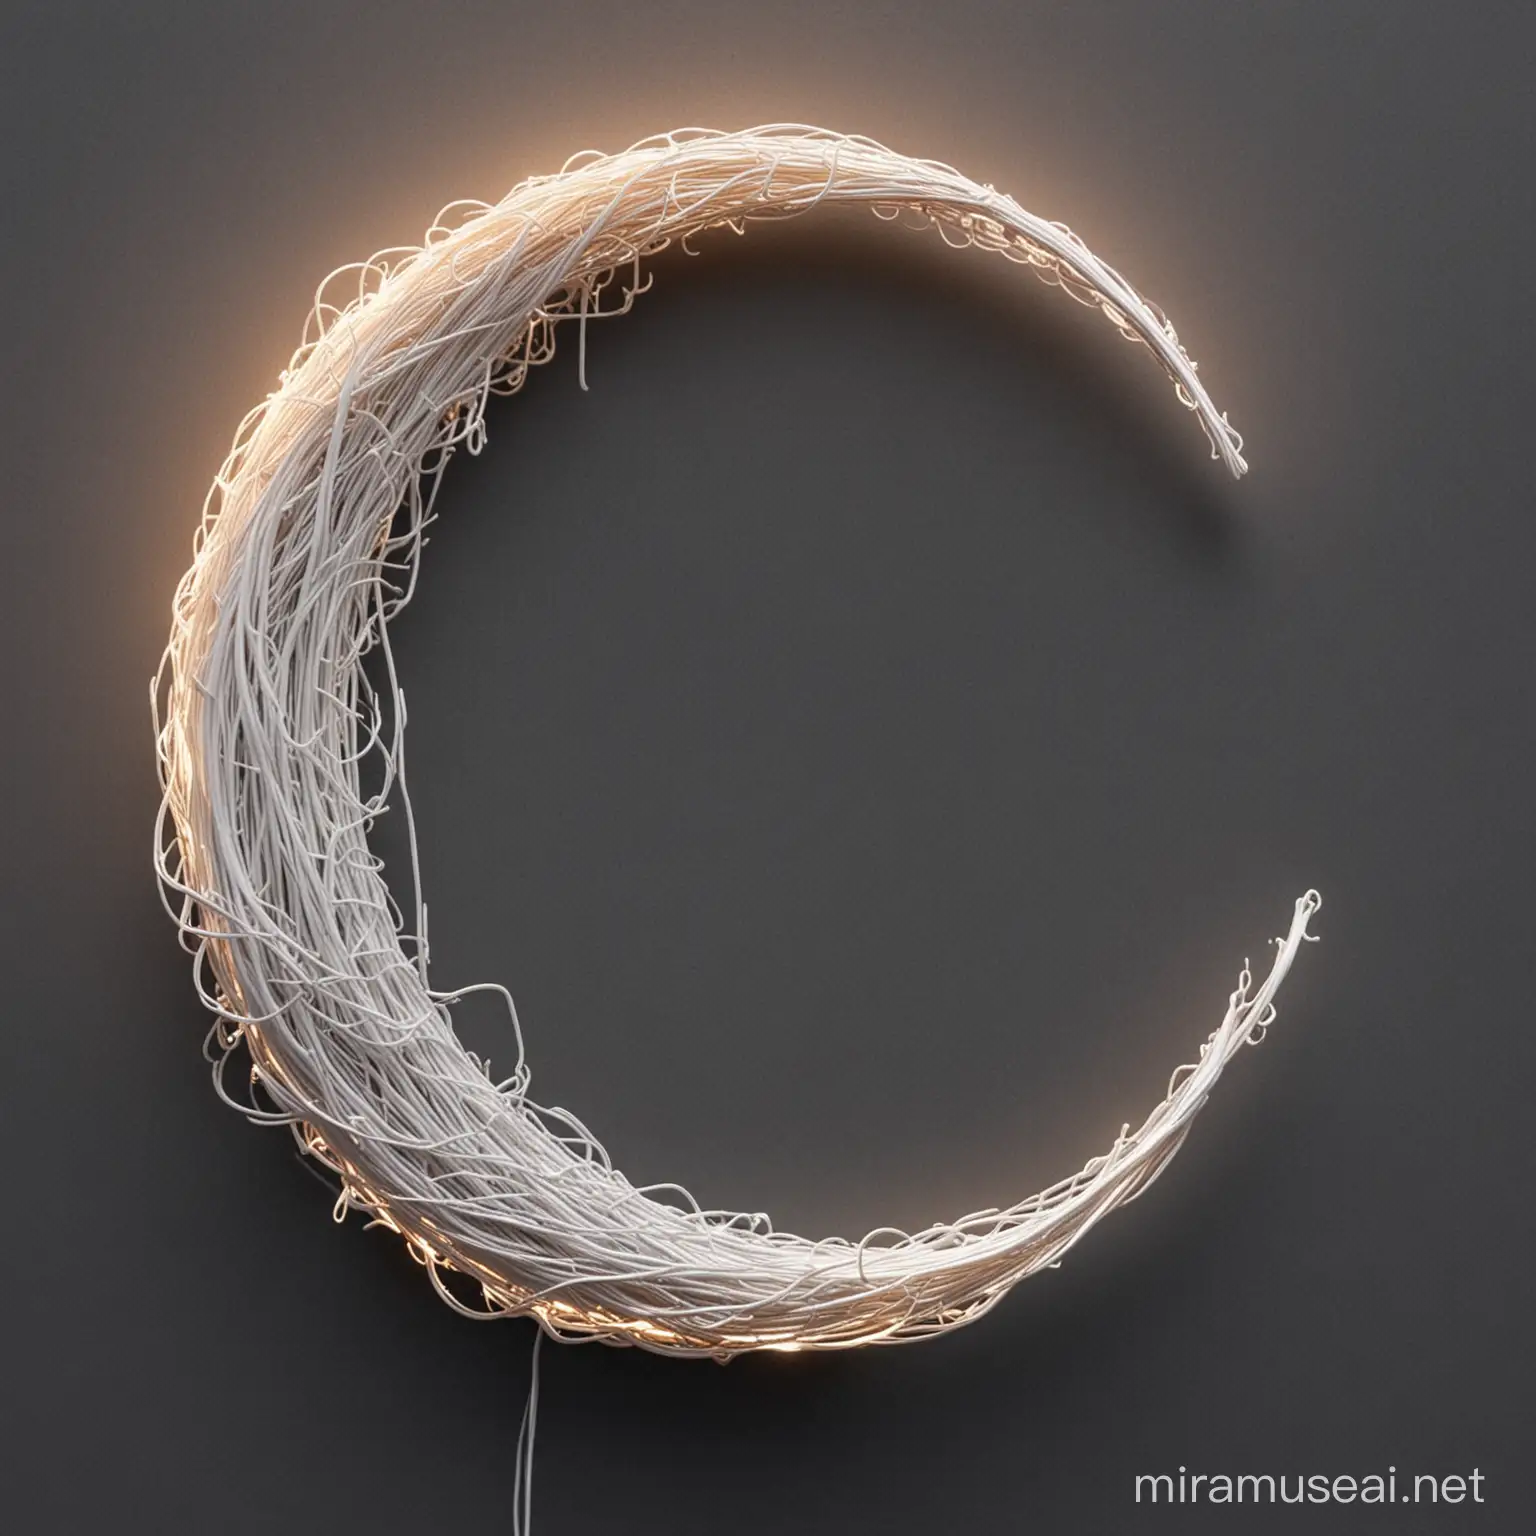 Waning Crescent Moon Crafted from Electric White Wire